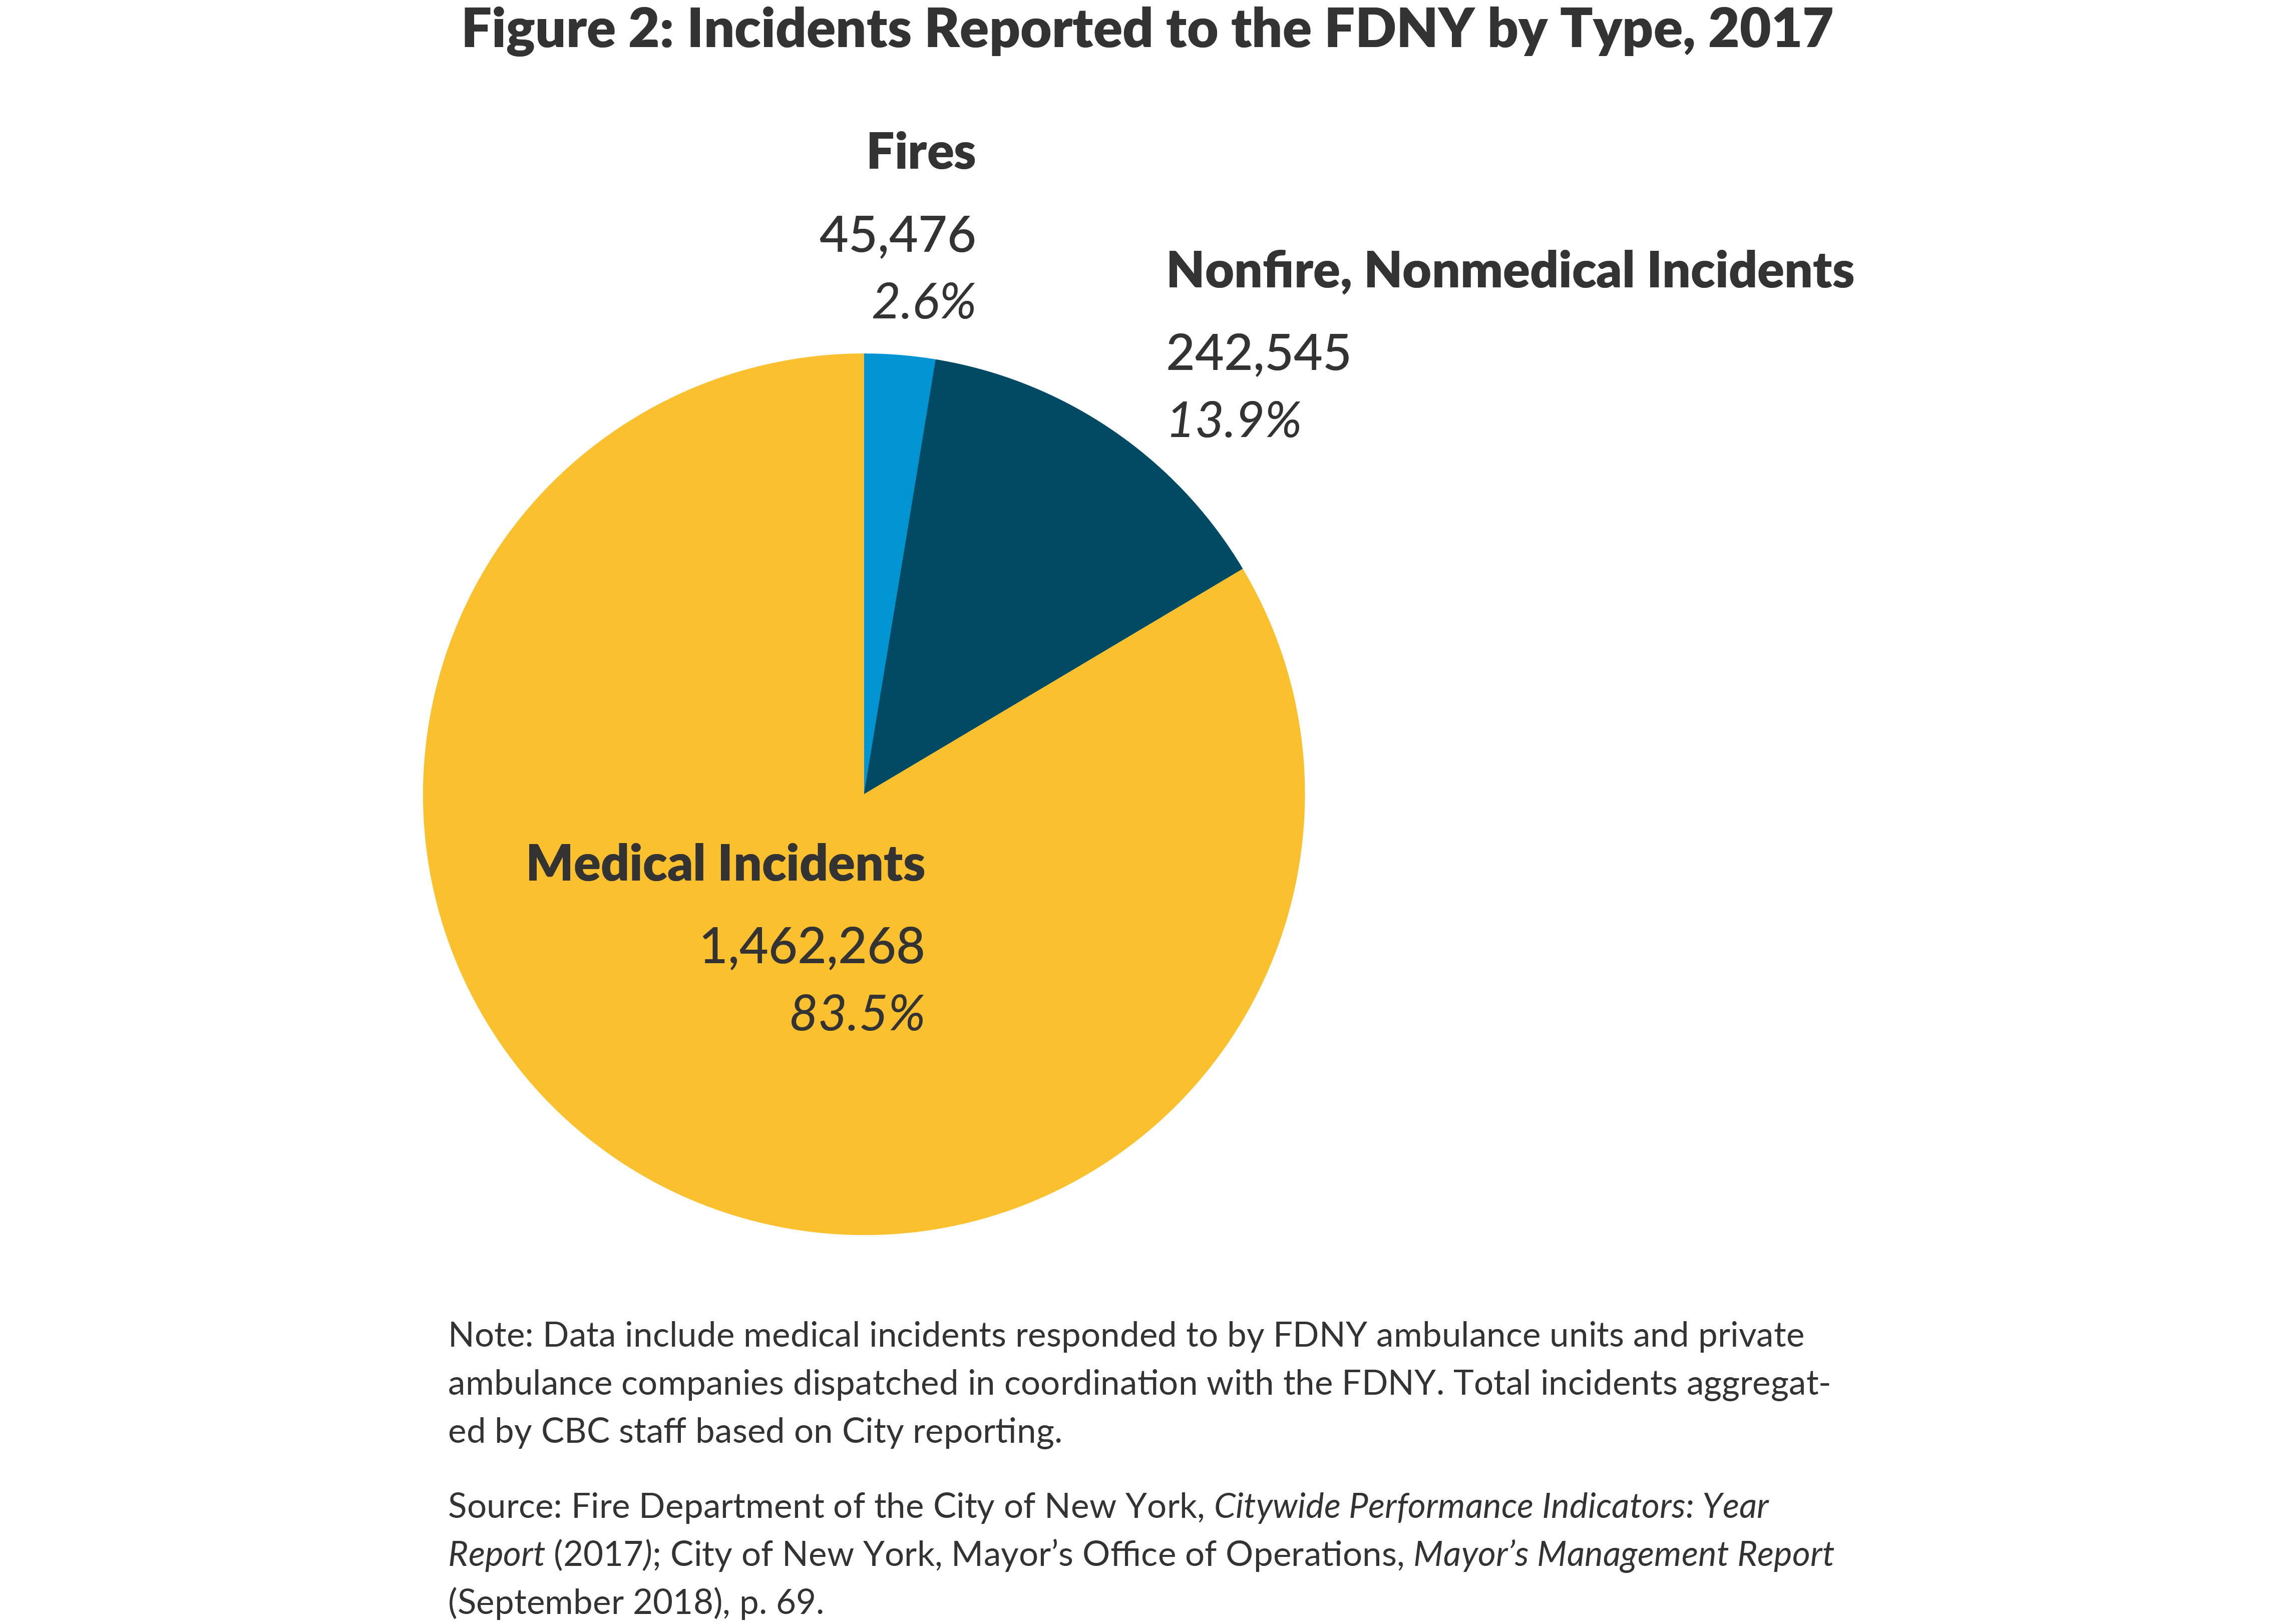 Figure 2: Incidents Reported to the FDNY by Type, 2017